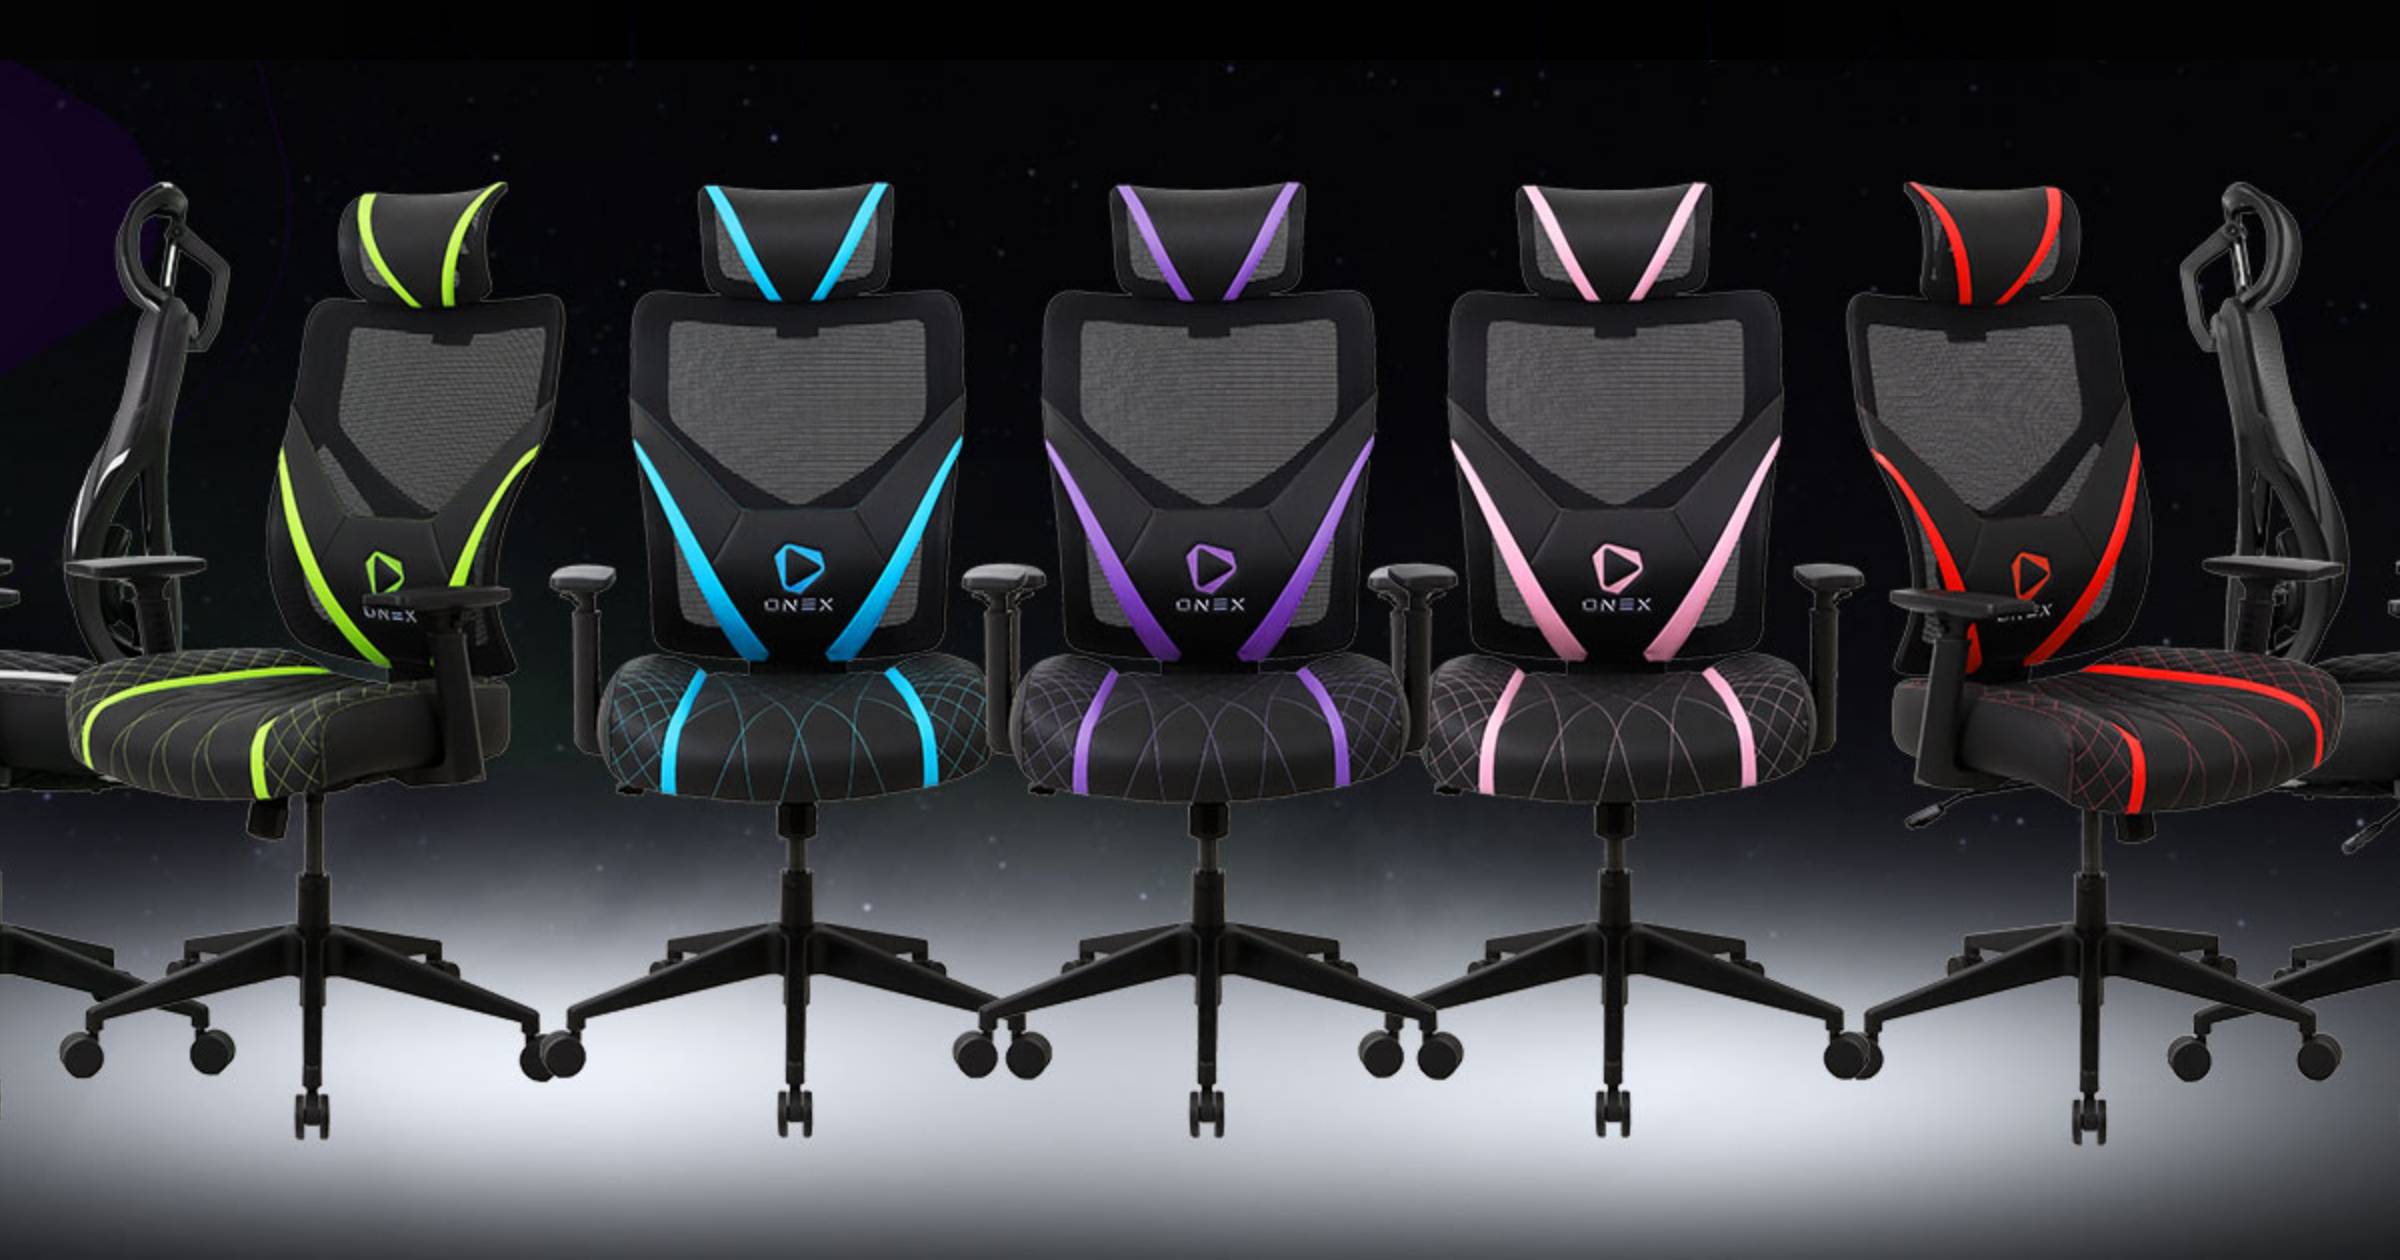 ONEX GE300 Gaming Chairs (Multiple Colours)